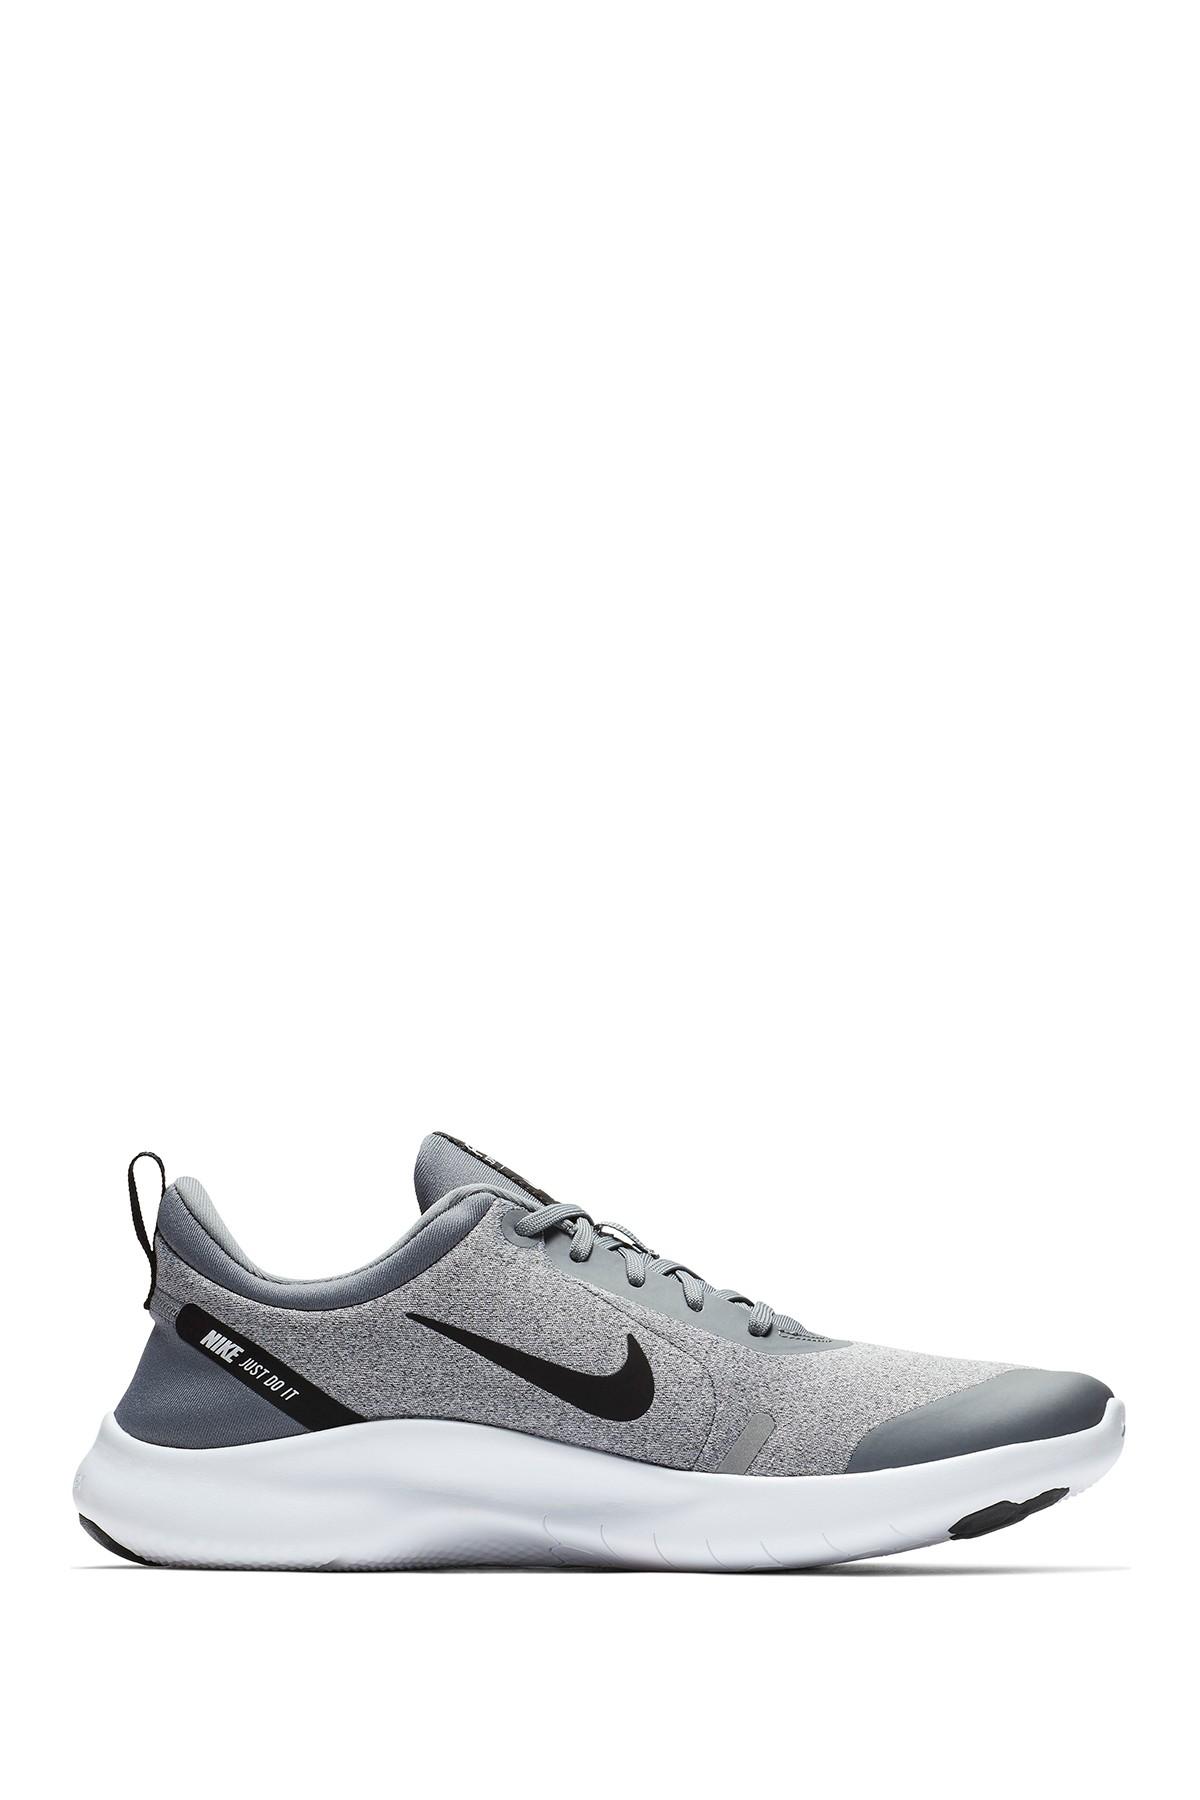 Nike Flex Experience Rn 8 Extra Wide Width Running Sneakers From Finish  Line in Purple (Gray) for Men - Lyst